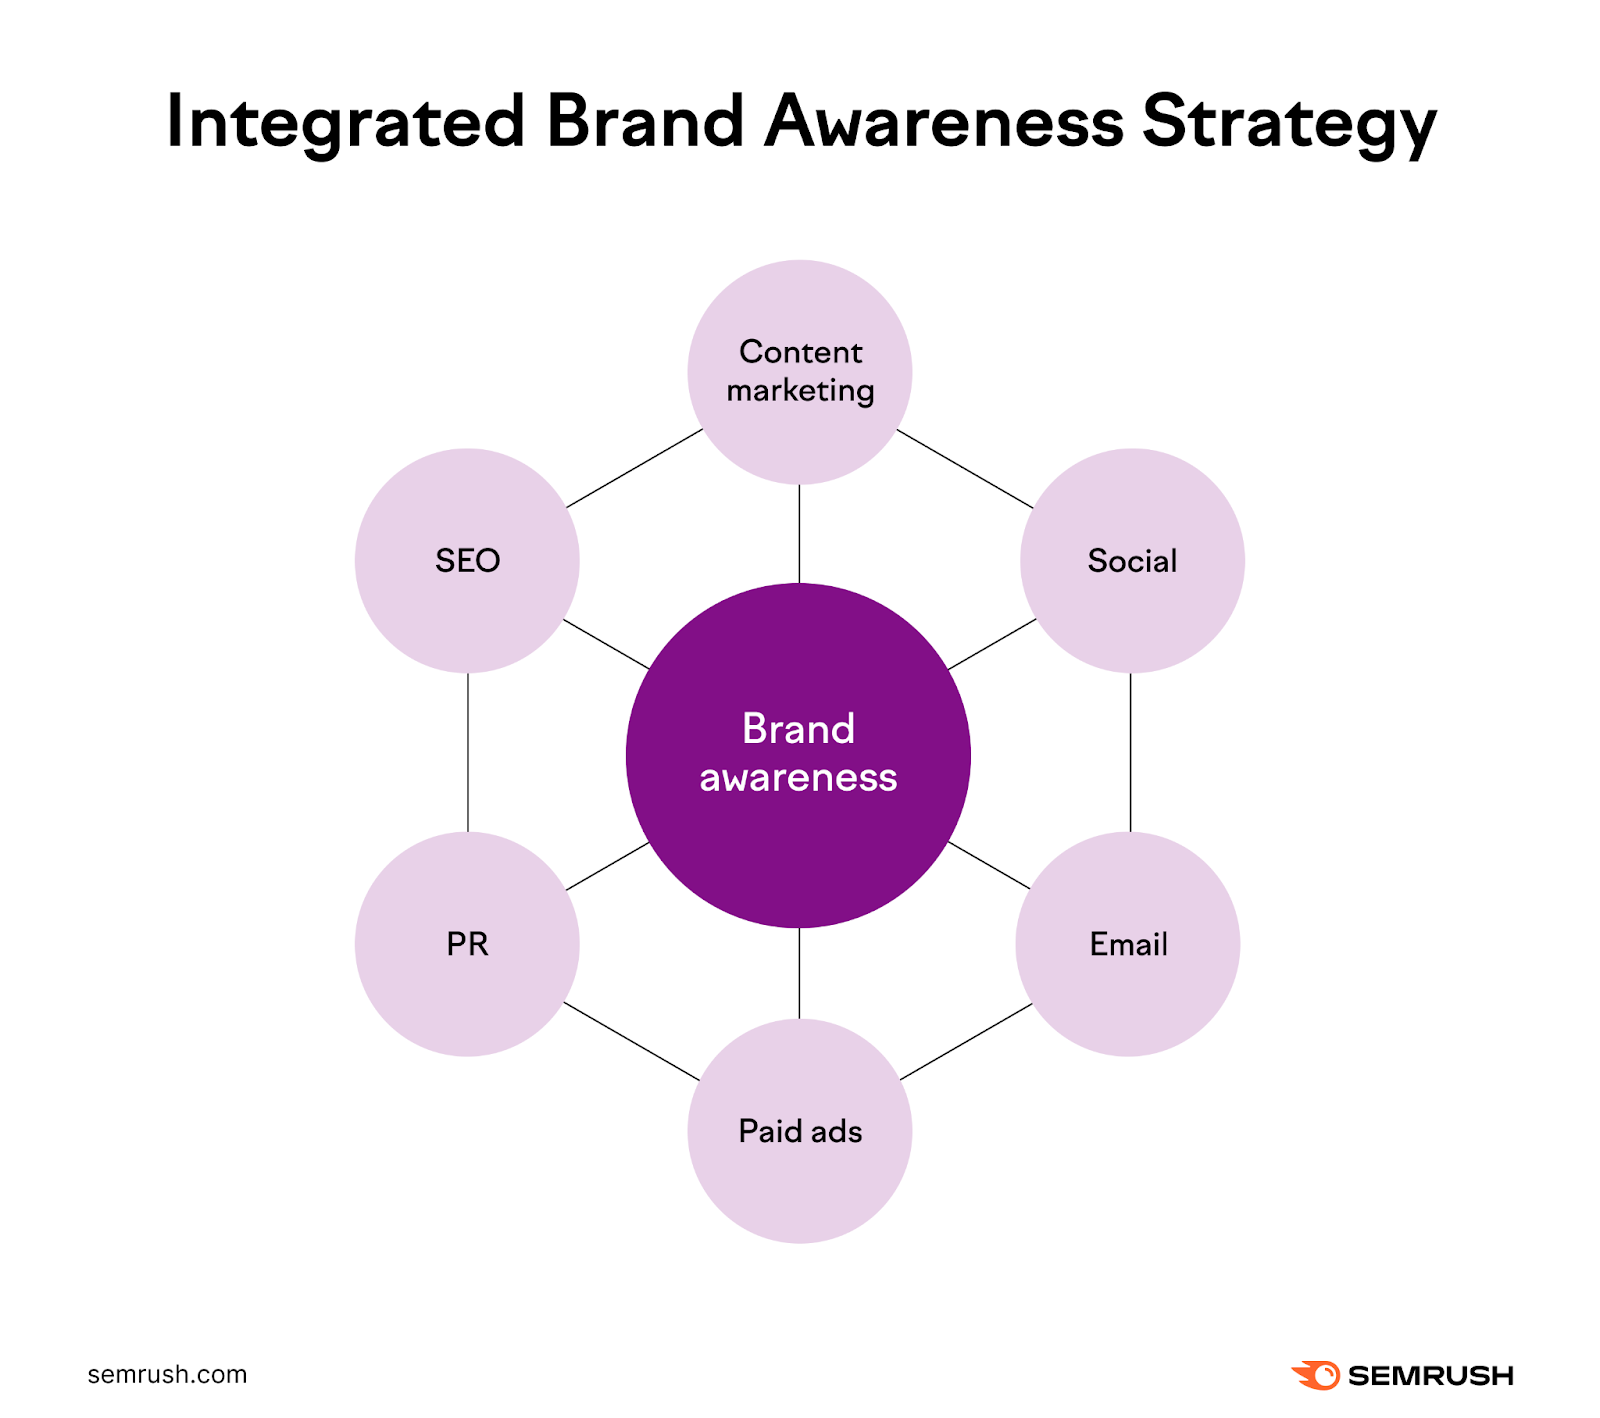 An infographic showing what integrated brand awareness strategy consists of